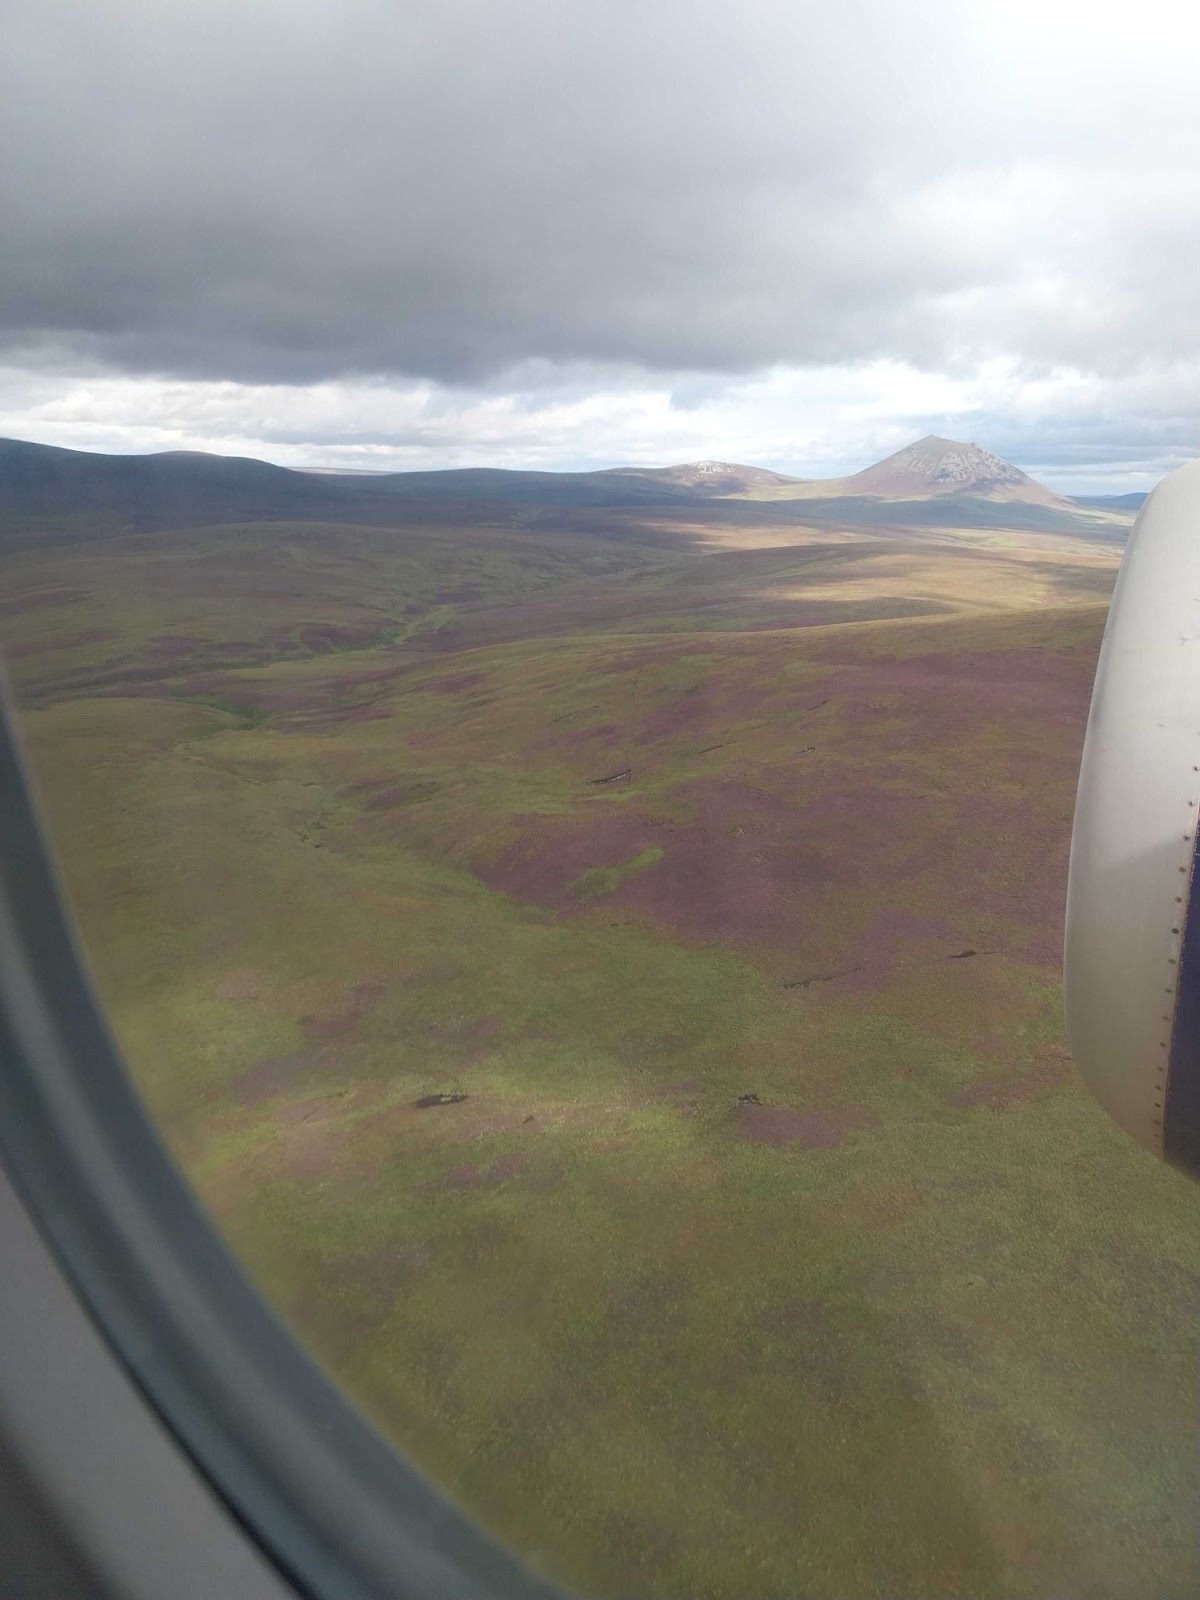 Scottish moorlands viewed from the window of a large aircraft that is flying over at low altitude. The edge of an engine is visible.